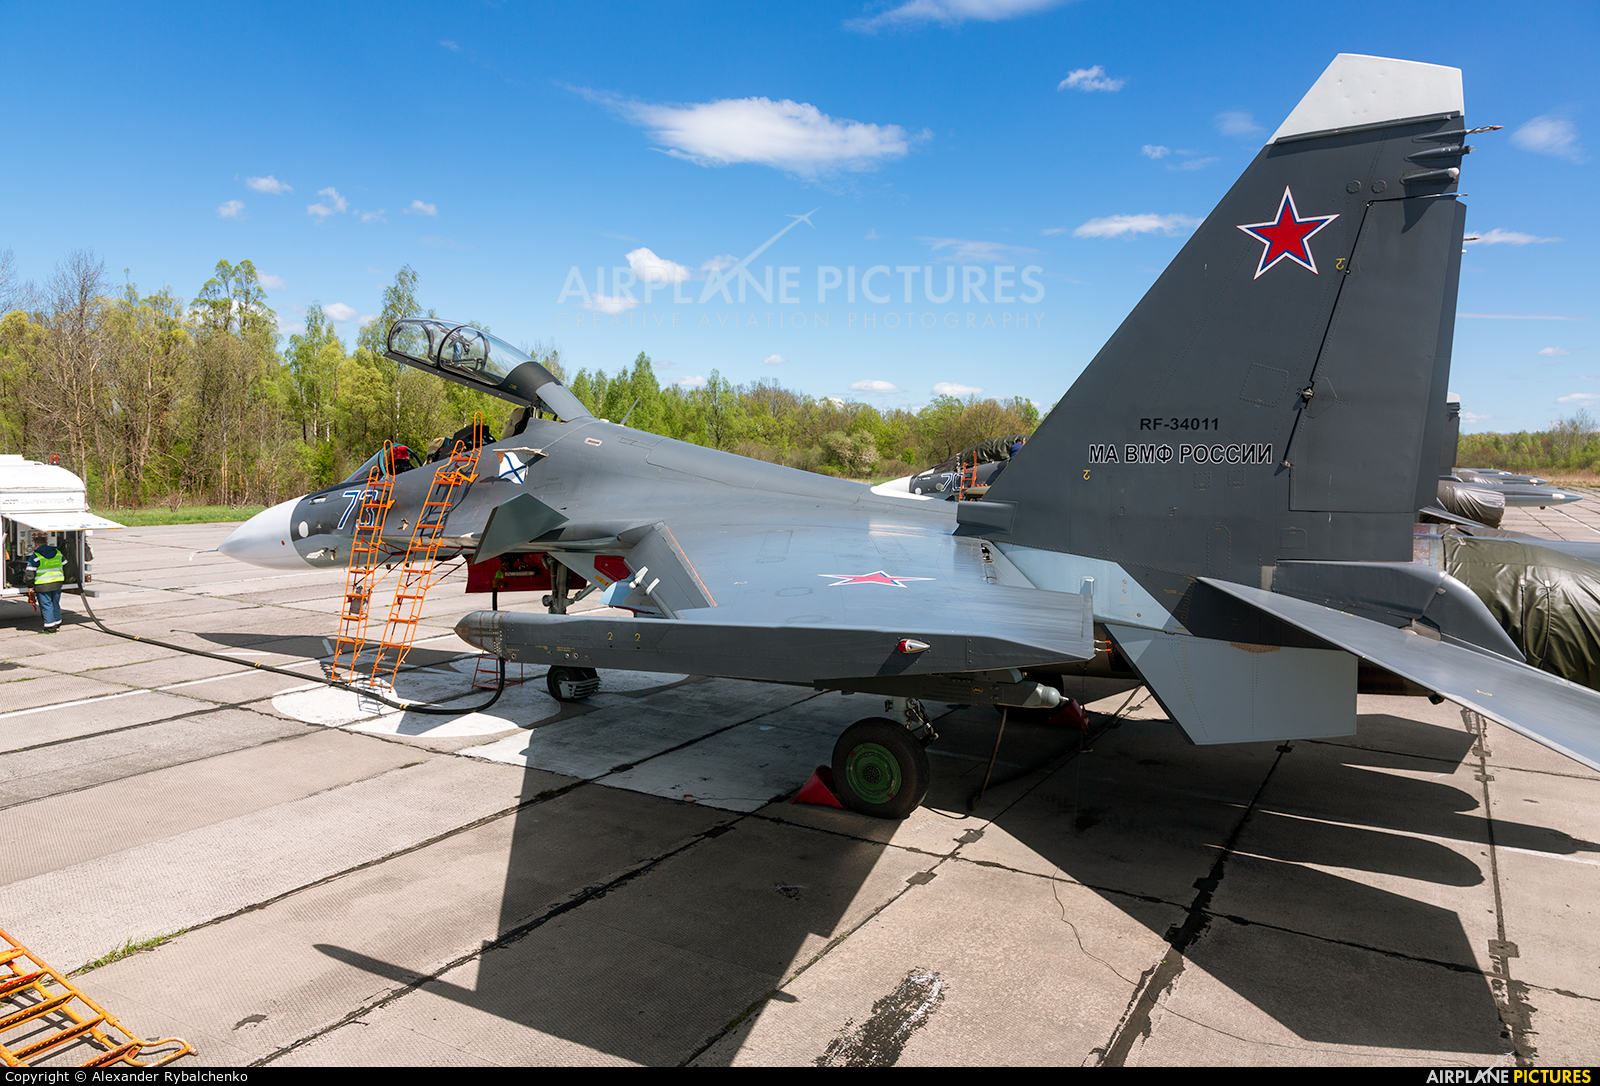 Russia - Navy RF-34011 aircraft at Undisclosed Location